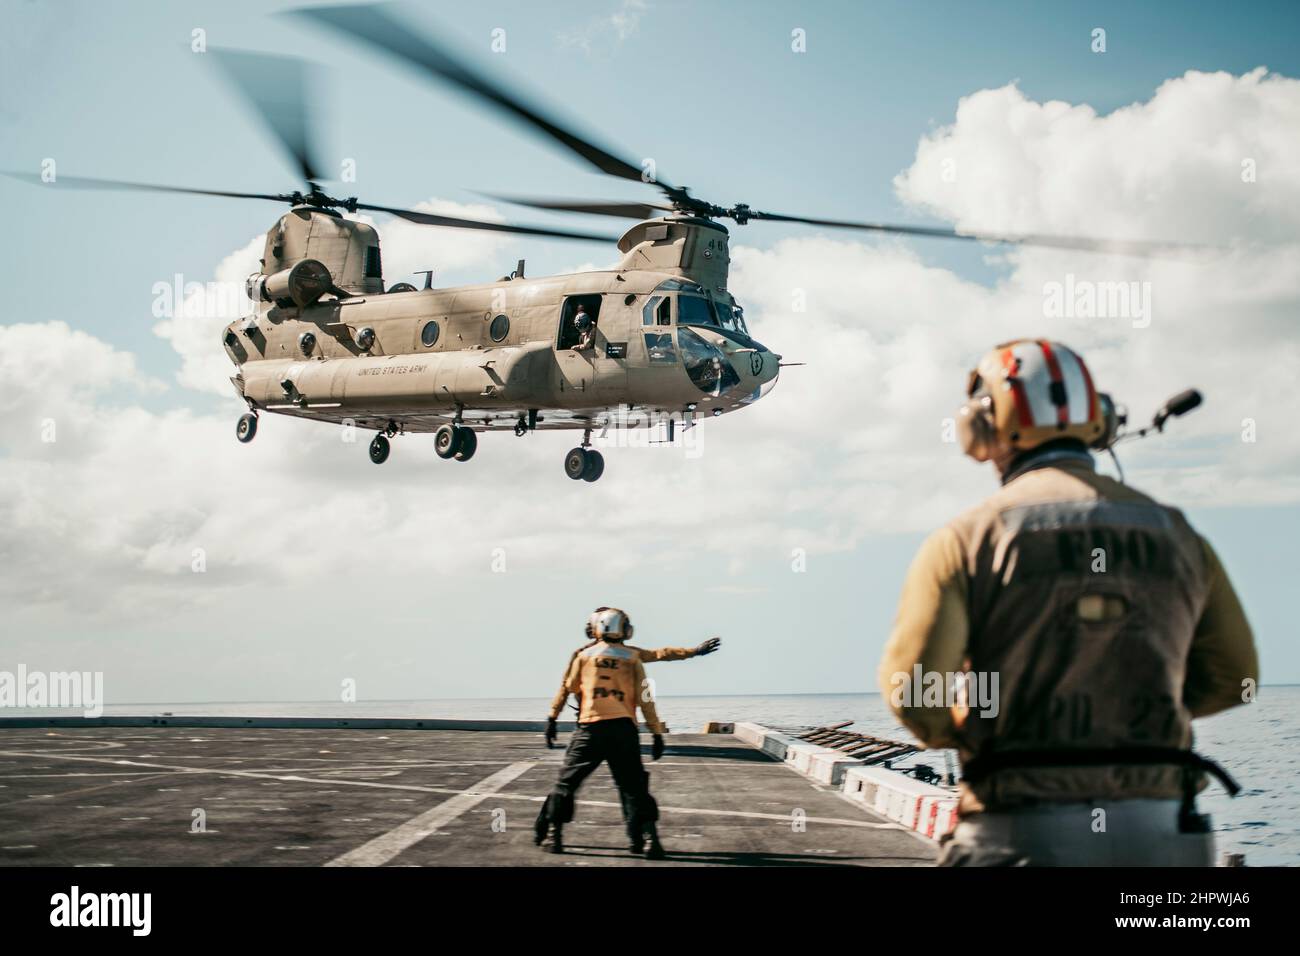 PACIFIC OCEAN (Feb. 18, 2022) U.S. Sailors assigned to amphibious transport dock USS Portland (LPD 27) signal to a U.S. Army CH-47F Chinook attached to 3rd Battalion, 25th Aviation Regiment, 25th Combat Aviation Brigade, while conducting deck landing qualifications, Feb. 18. Marines and Sailors of the 11th Marine Expeditionary Unit and Essex Amphibious Ready Group are underway conducting routine operations in U.S. 3rd Fleet. (U.S. Marine Corps photo by Gunnery Sgt. Donald Holbert) Stock Photo